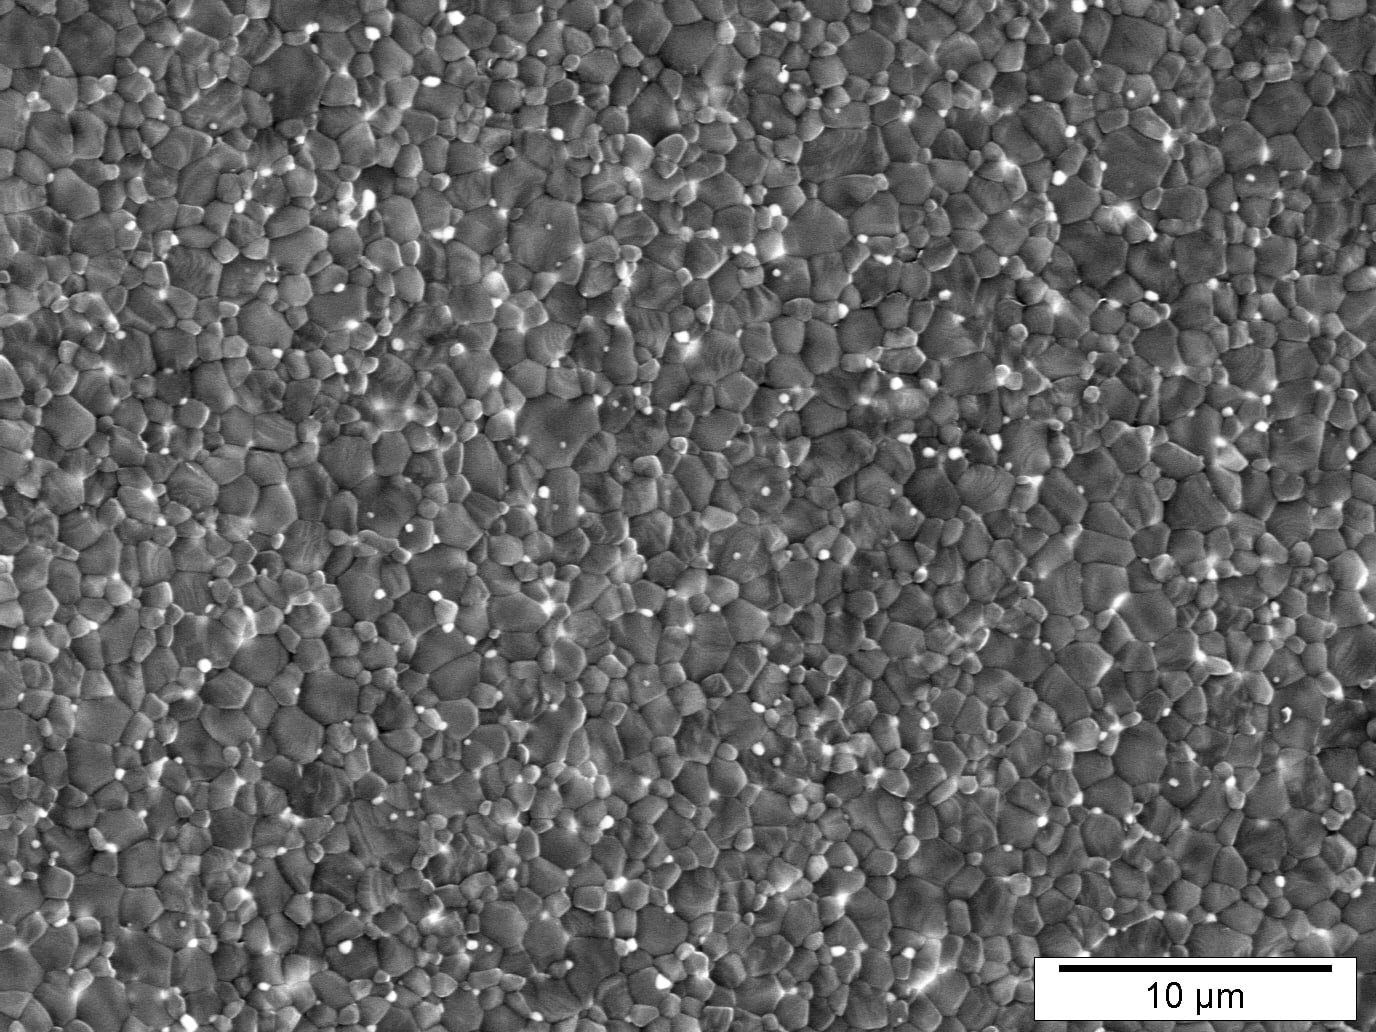 fine grained surface of the ATS material